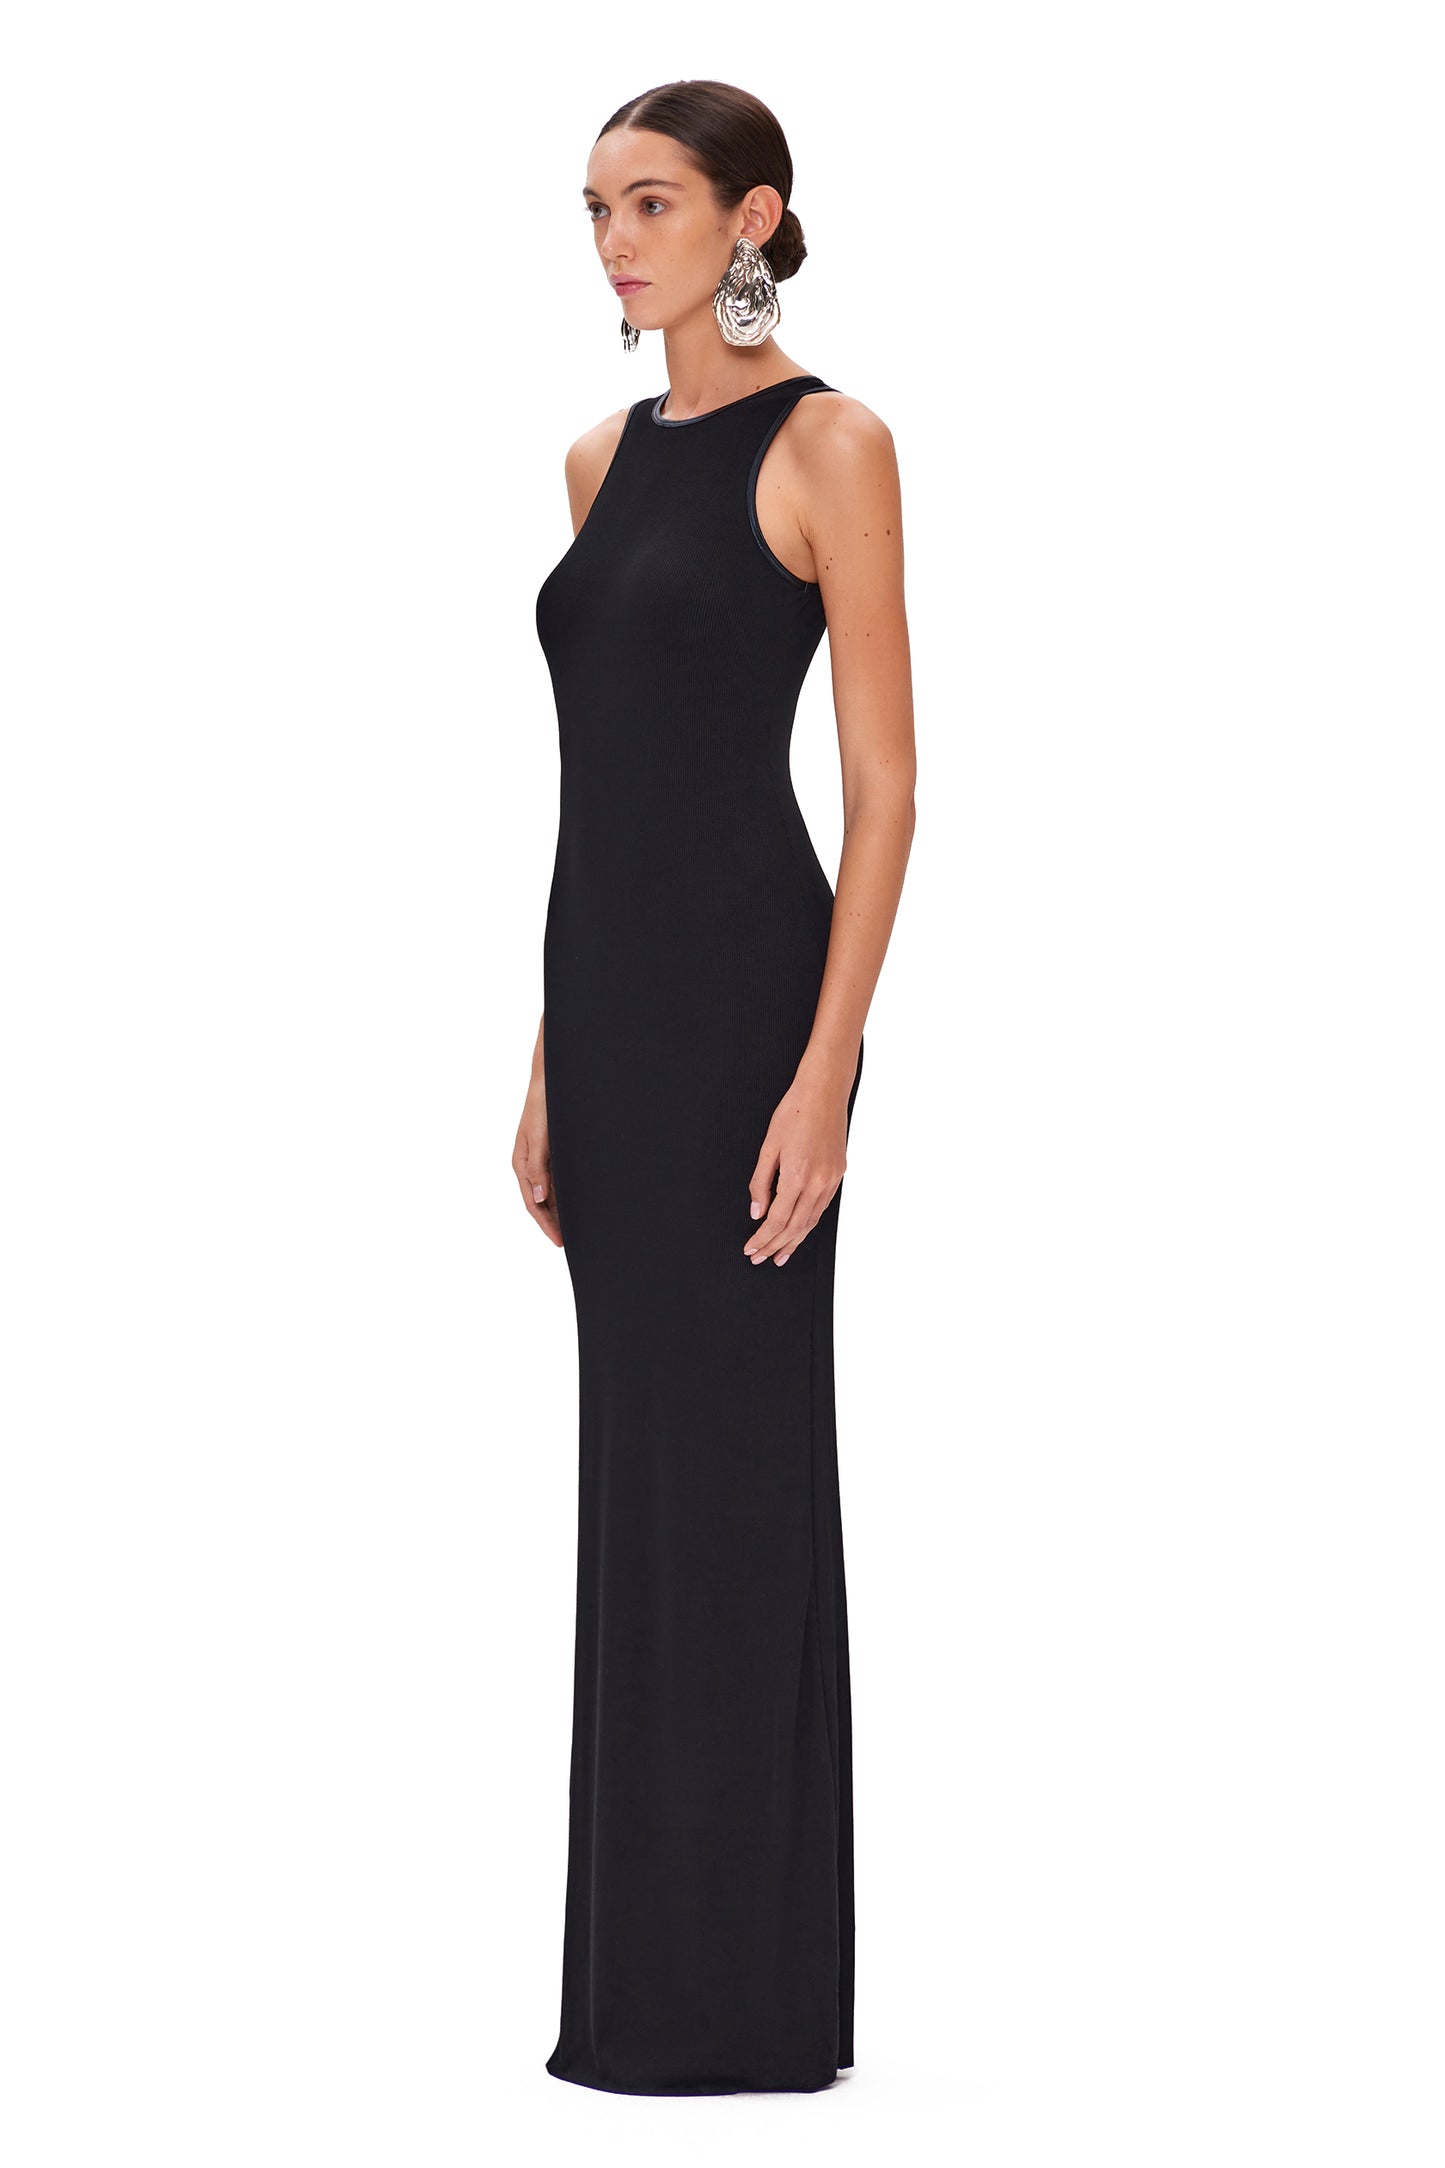 FITTED RIB MAXI DRESS WITH LYCRA EDGES